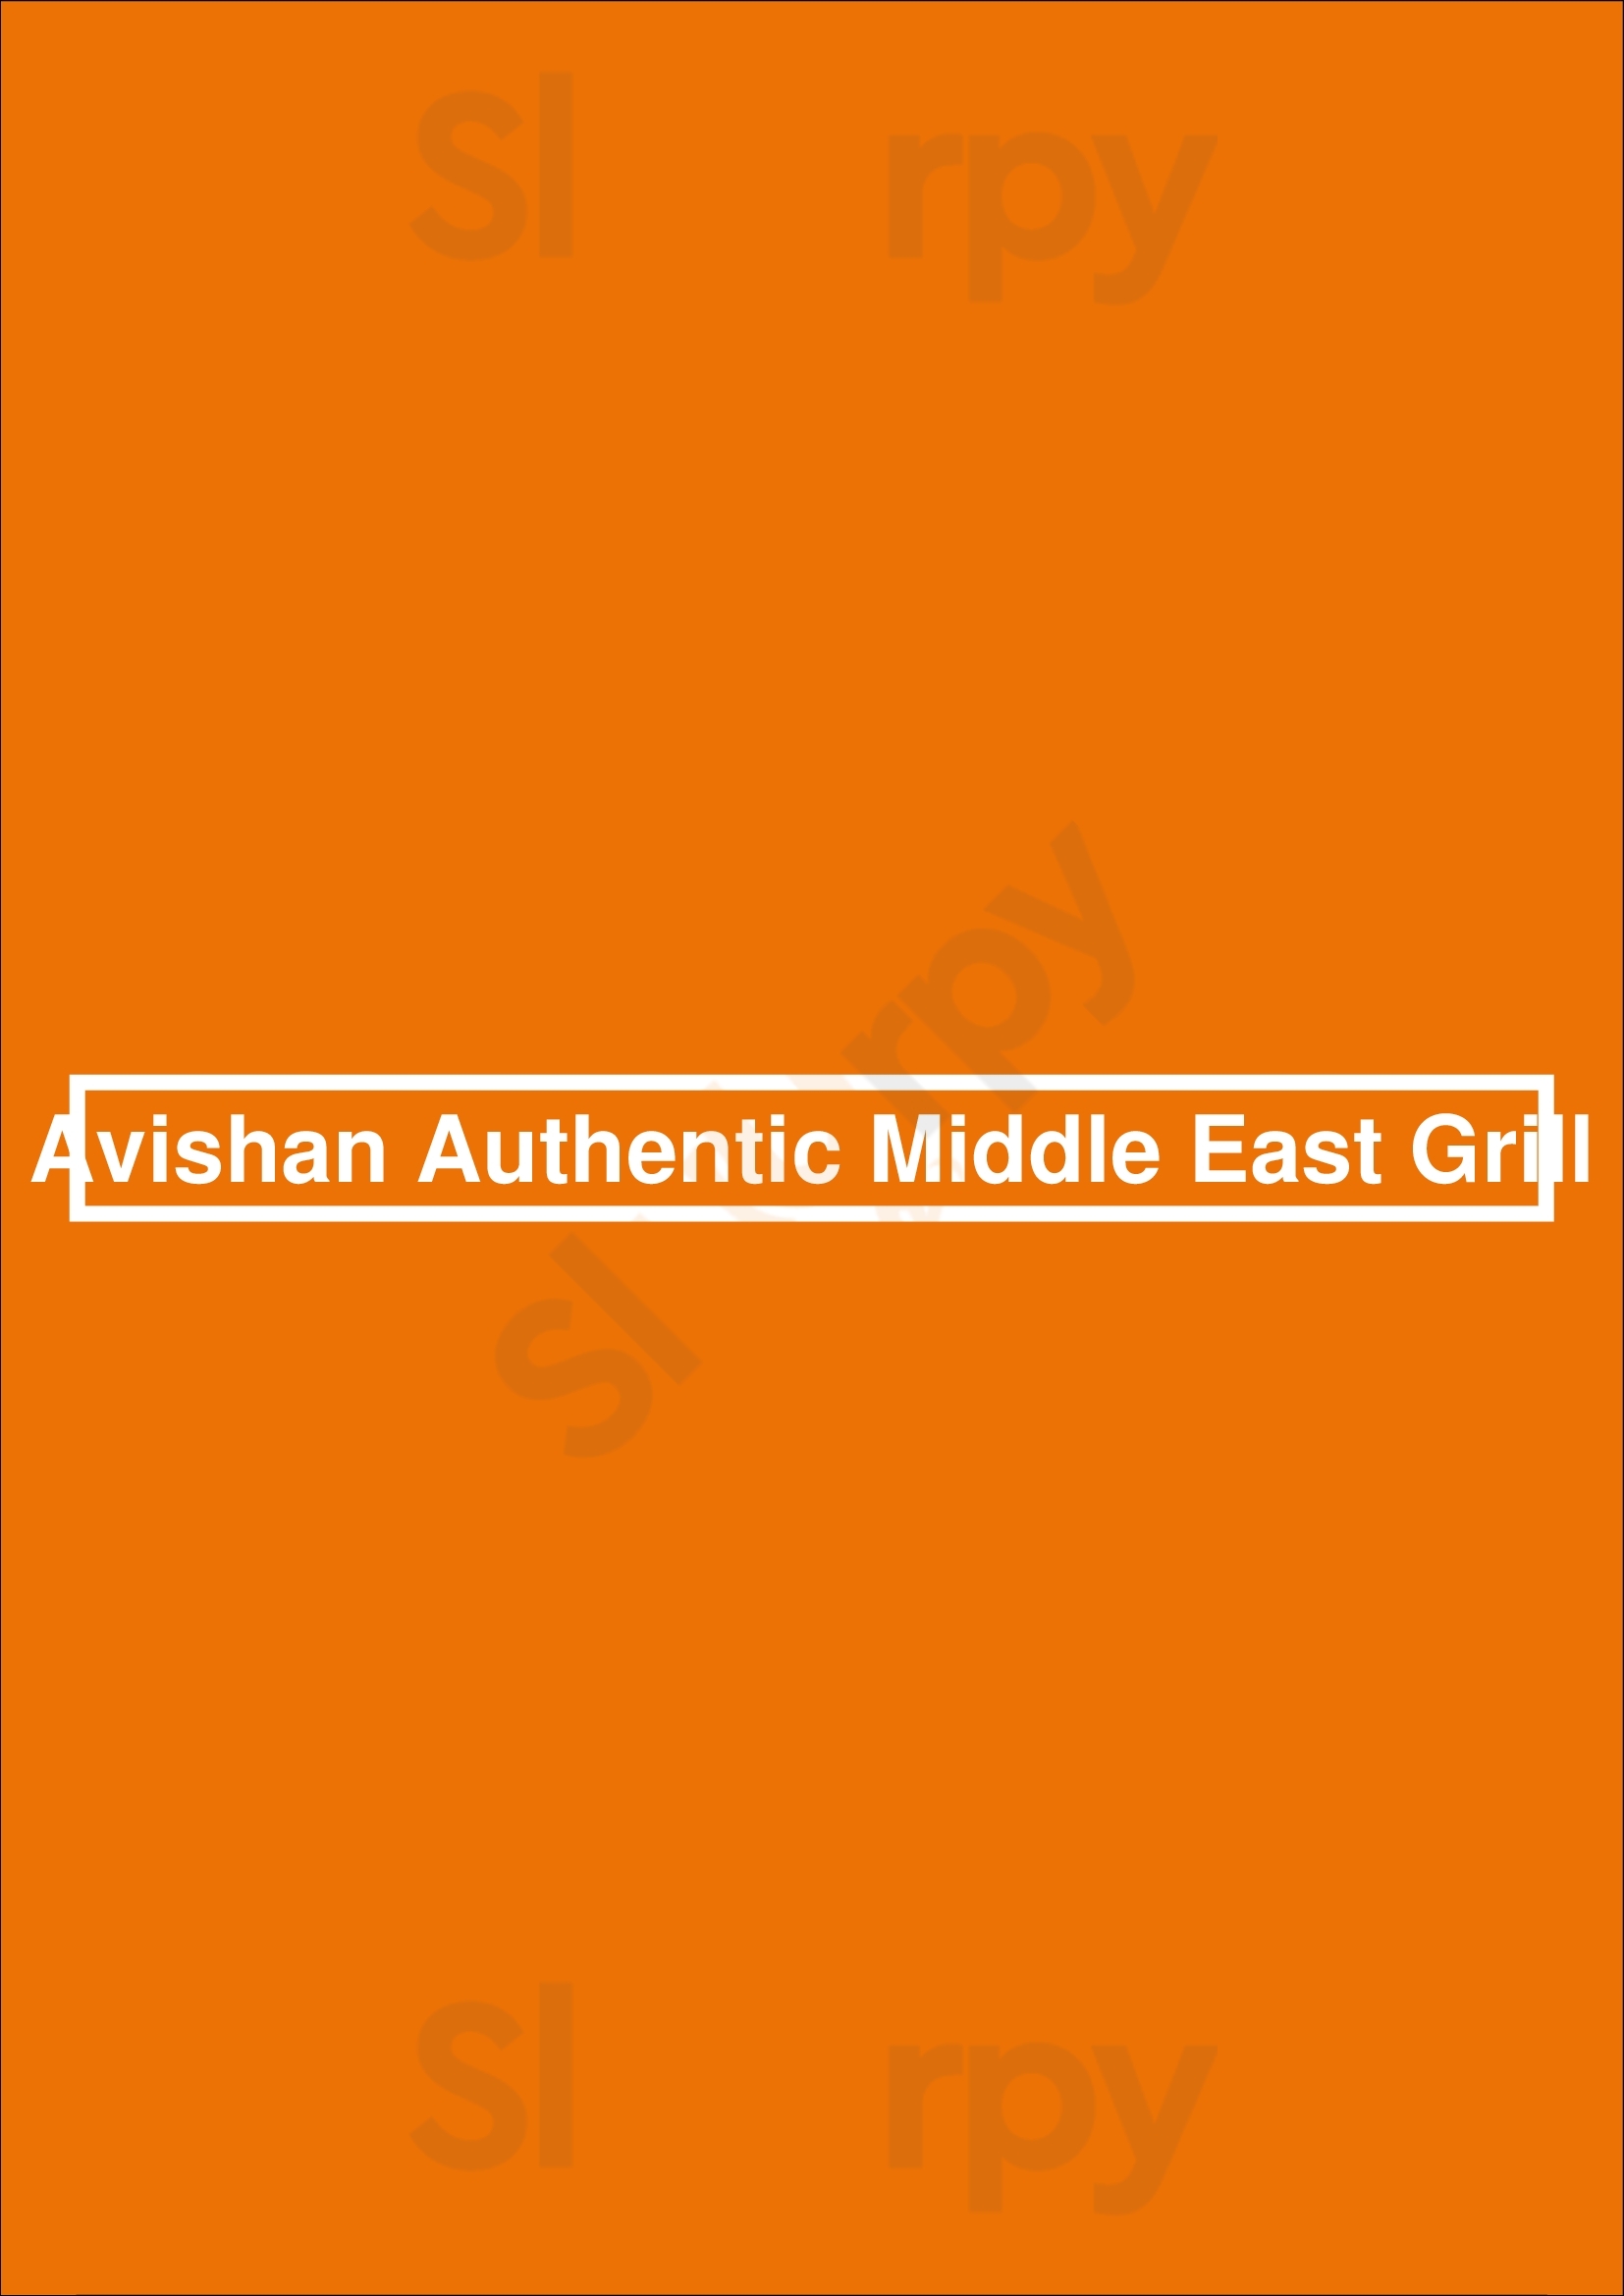 Avishan Authentic Middle East Grill Langley Menu - 1